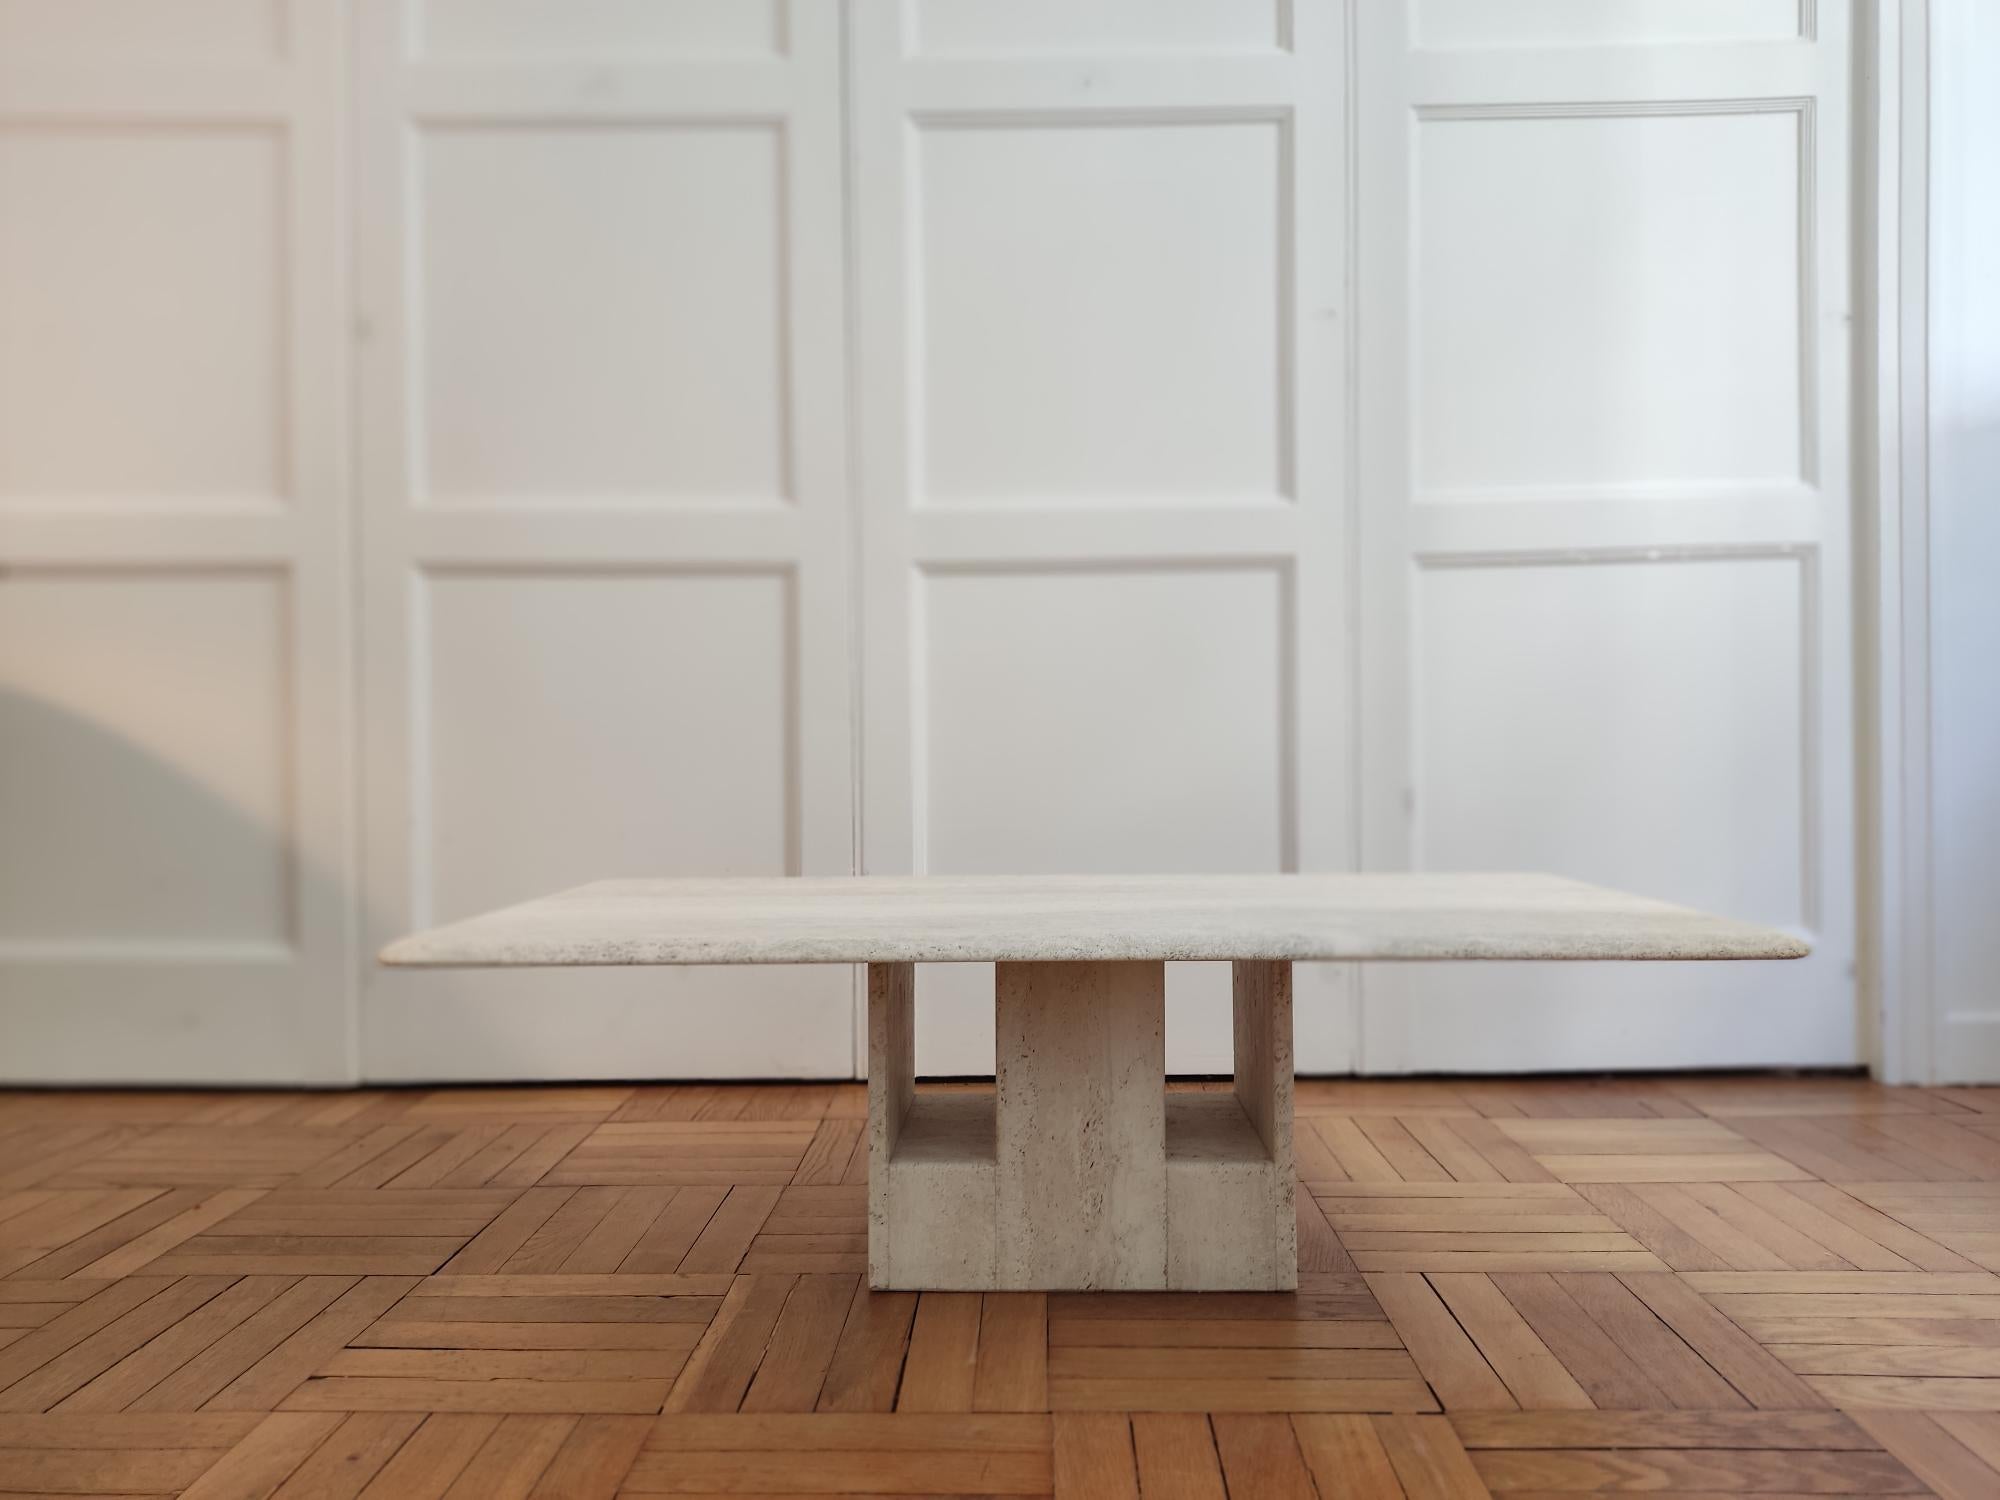 Travertine coffee table. A rectangular top with rounded edges and a sculptural travertine foot. The whole thing is in a single block.
This table comes directly from the designer Claude Berraldacci. They were designed in the 90s. The brand was called